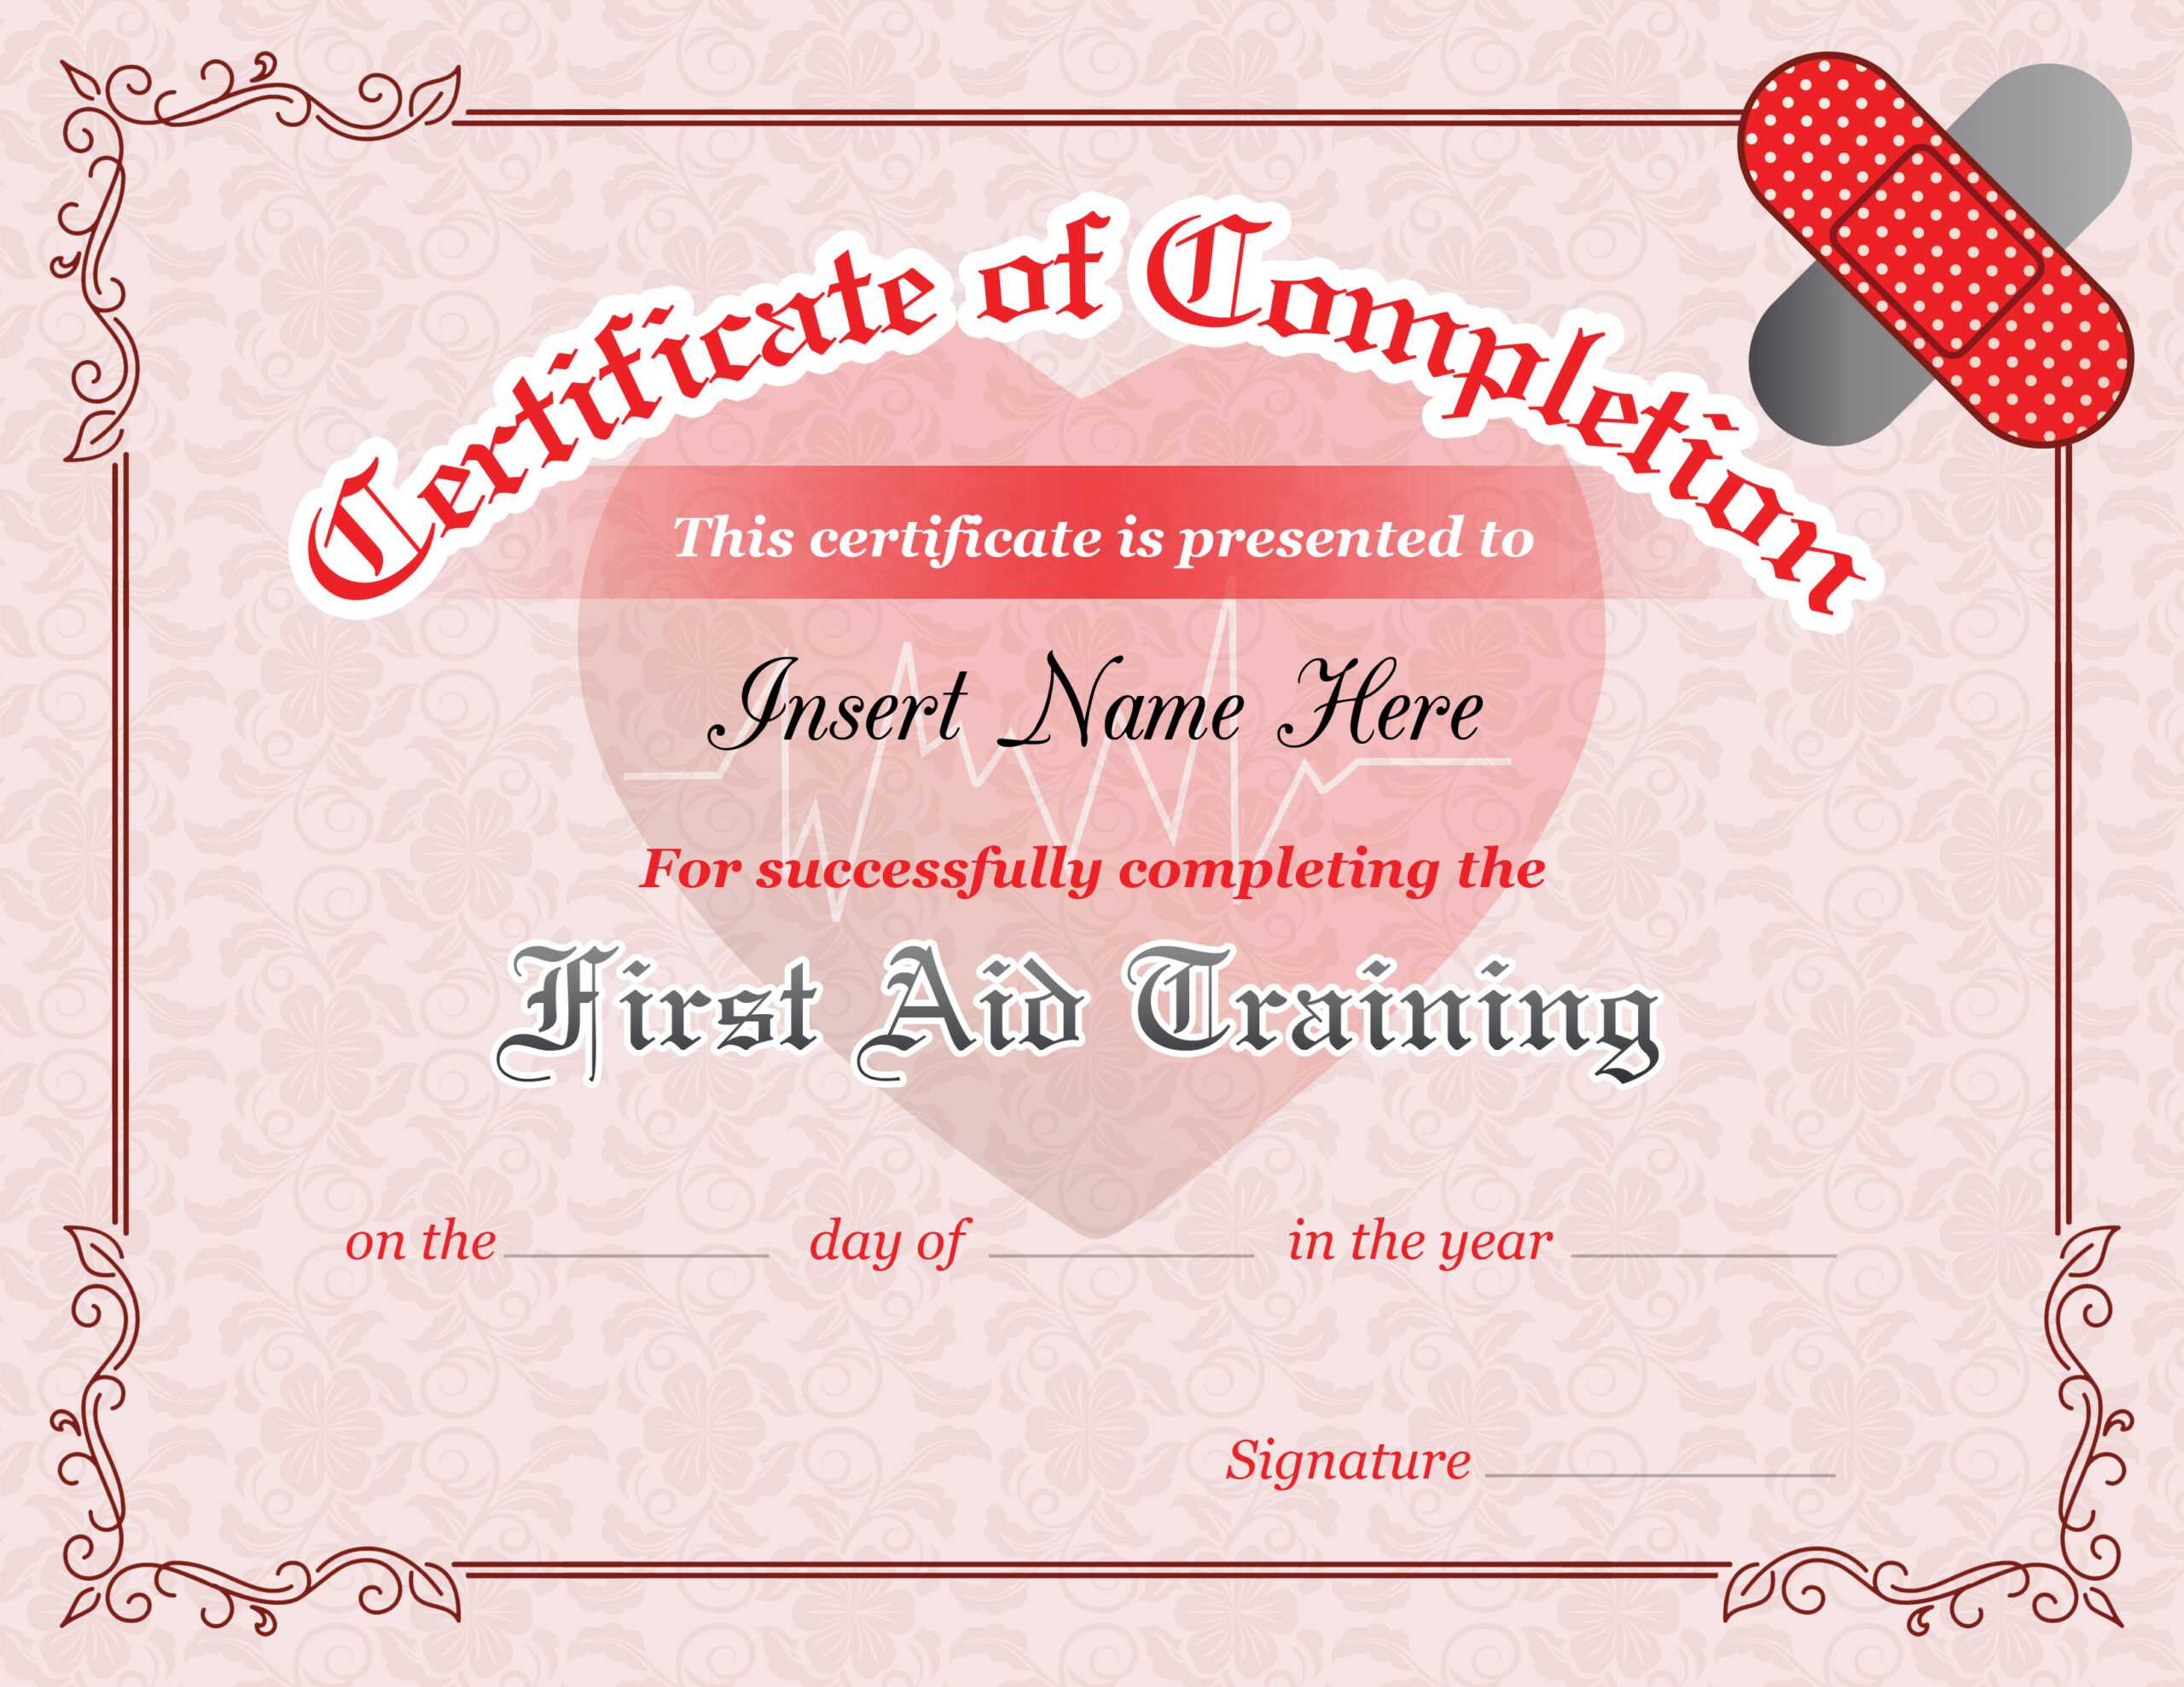 First Aid Training Completion Certificate Template | Formal In Training Certificate Template Word Format